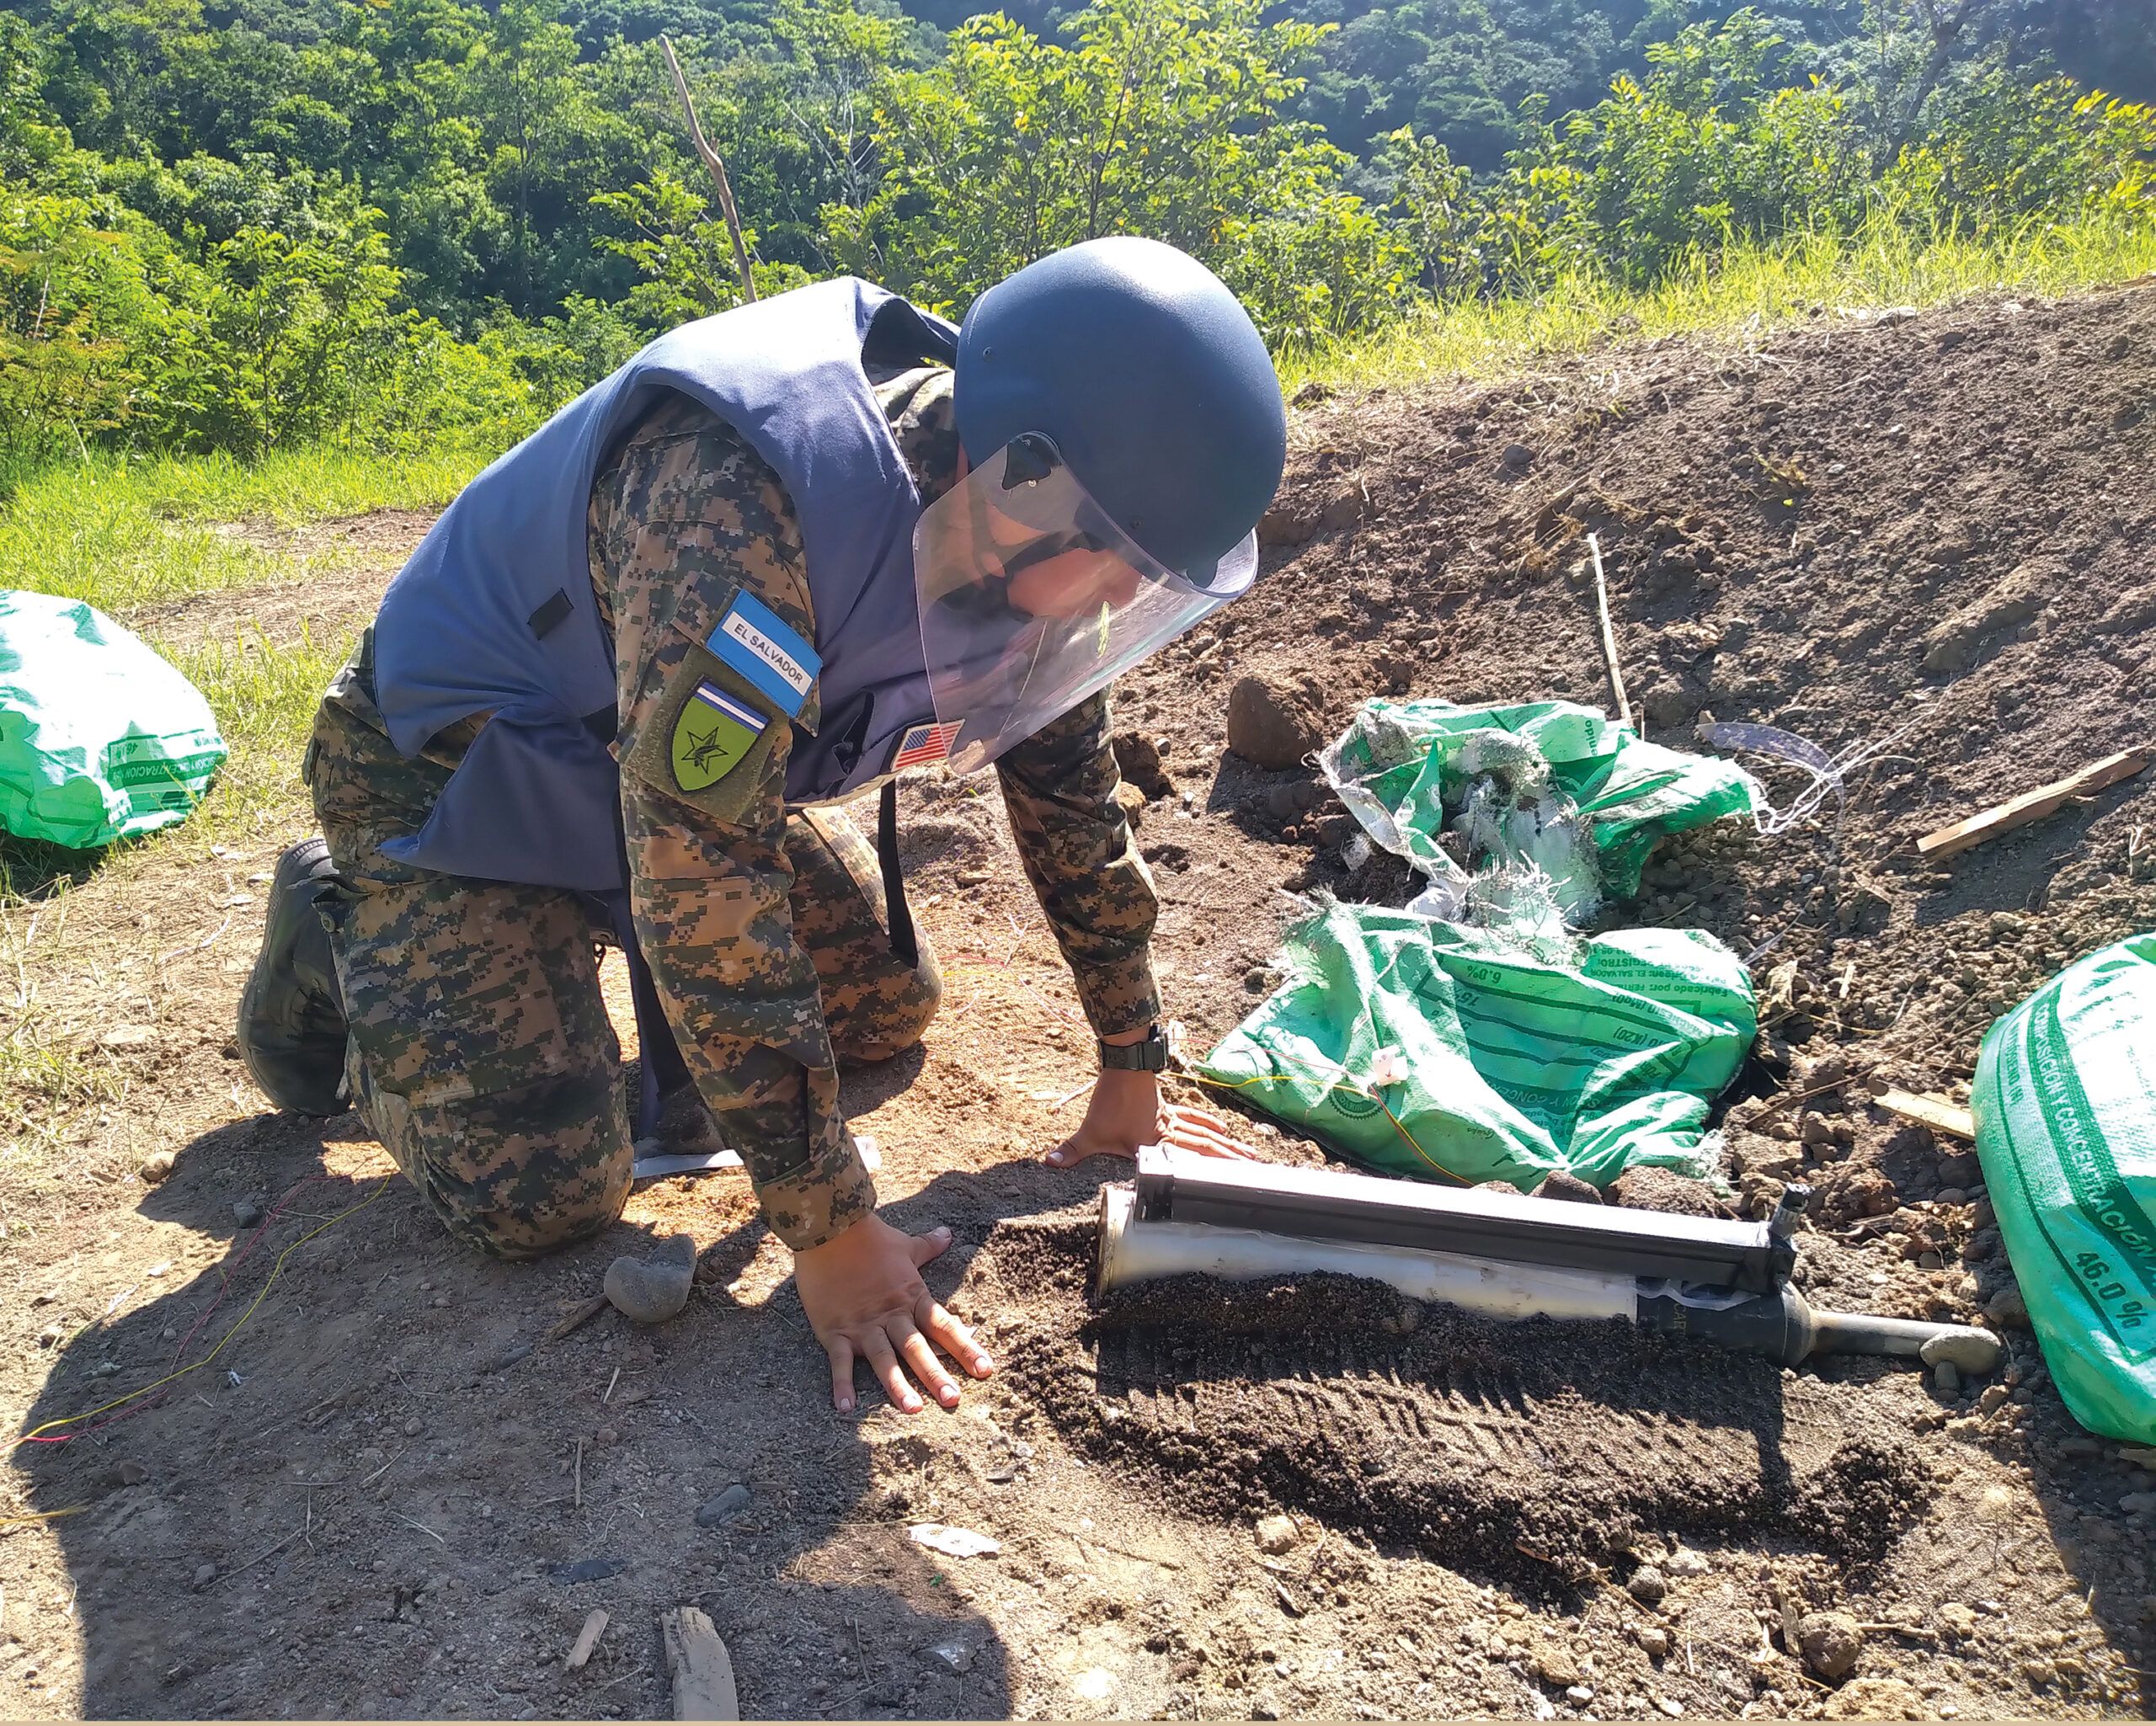 A man in protective gear kneeling in the dirt beside a metal object